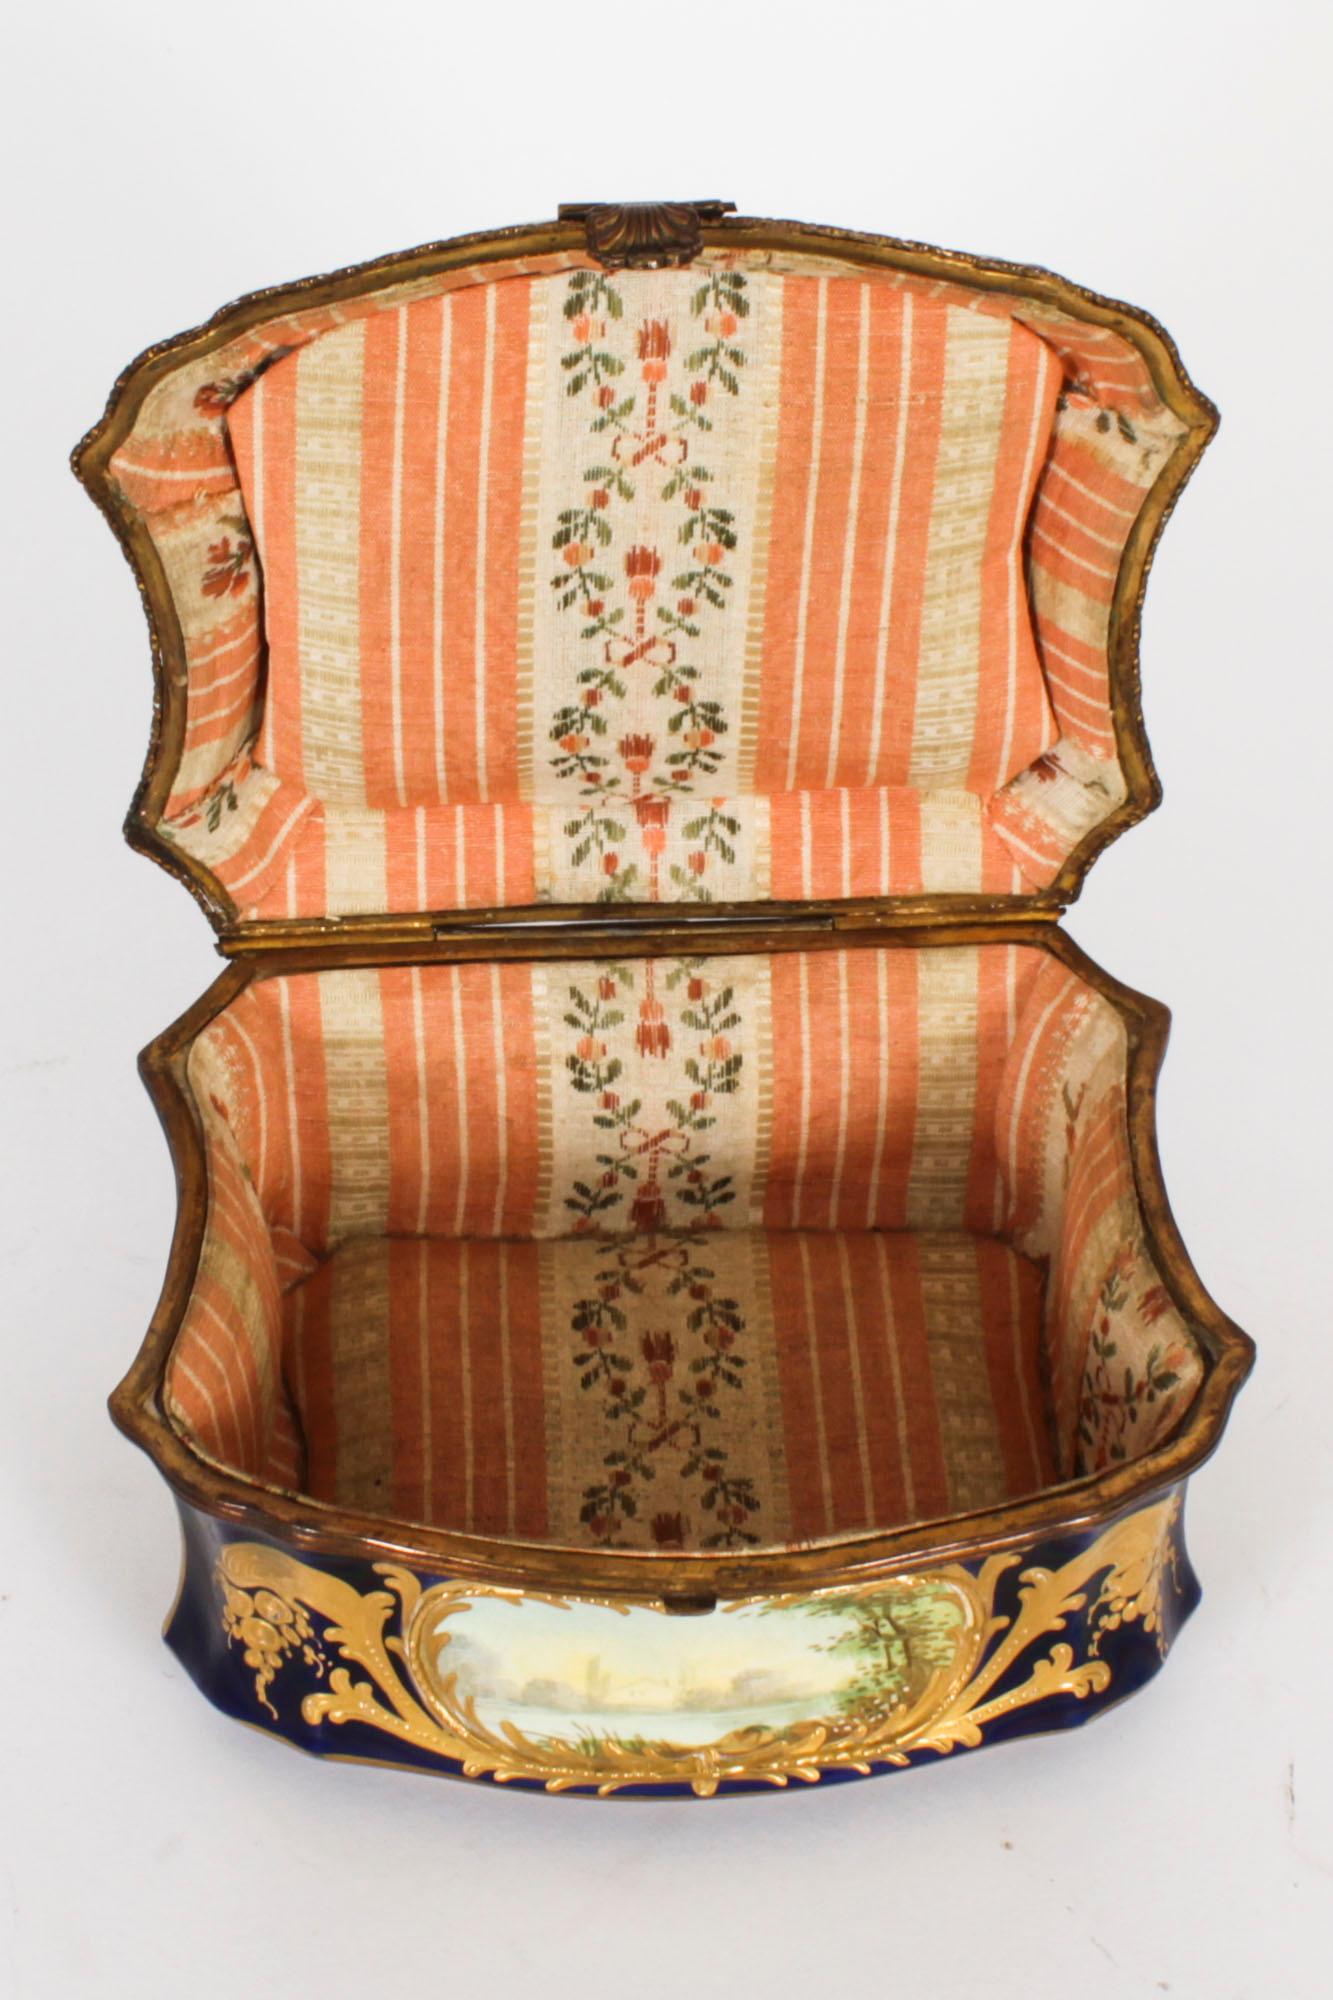 This is a fabulous antique French Sevres ormolu mounted cobalt blue soft paste porcelain  jewellery casket, Circa 1870 in date.

The shaped hinged ormolu mounted cover is superbly decorated with a hand painted courting couple in a richly gilded